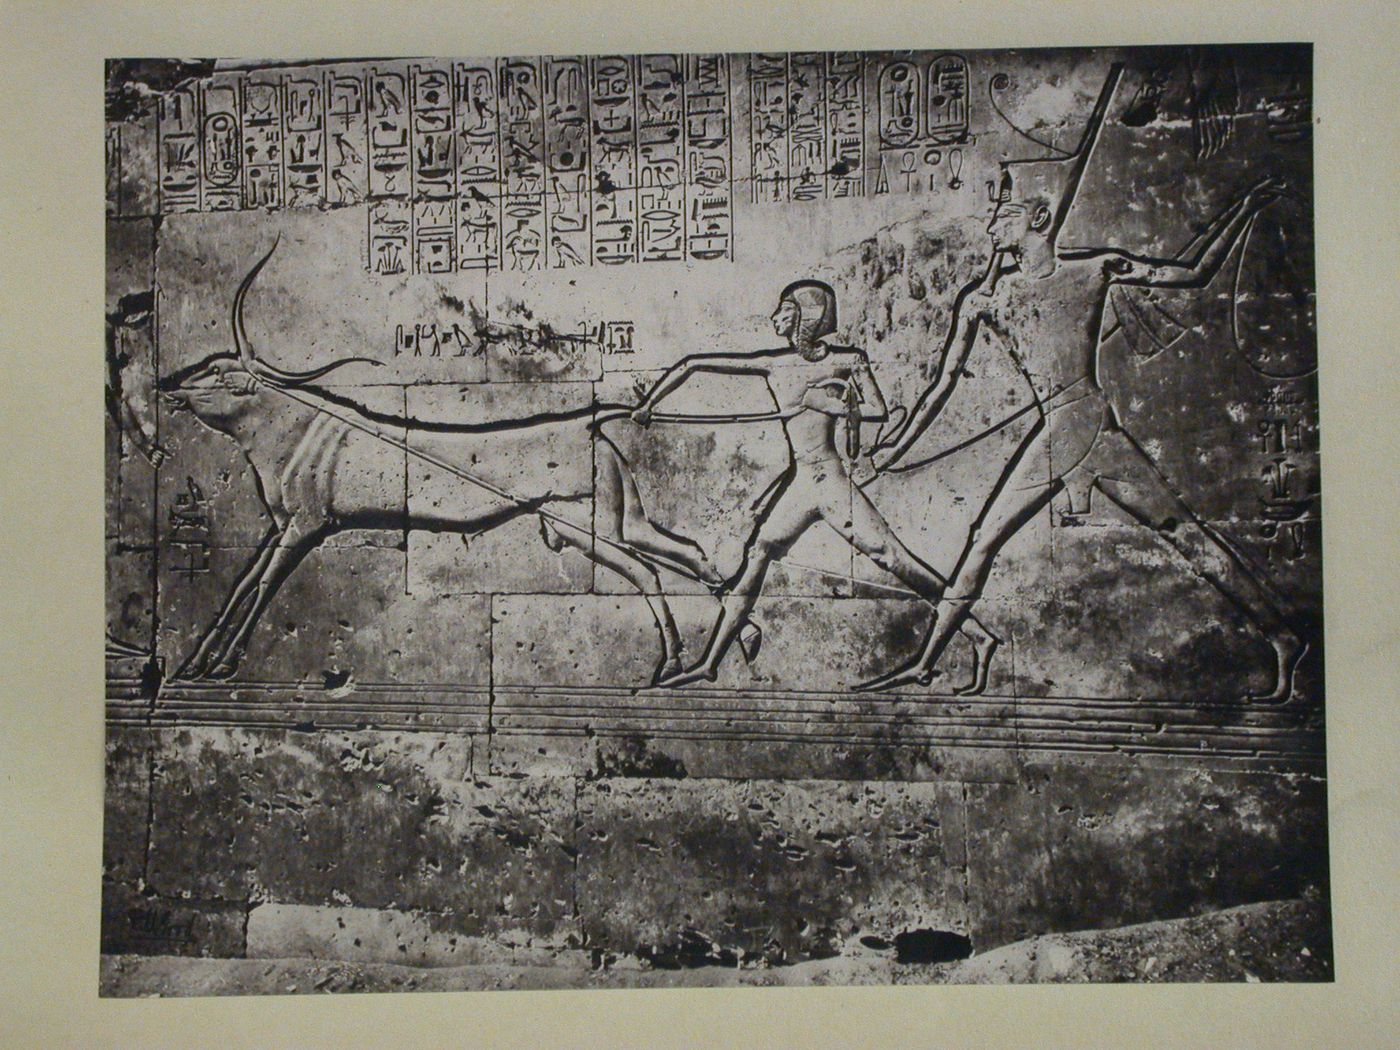 Temple of Seti I, relief on East Wall, Abydos, Egypt